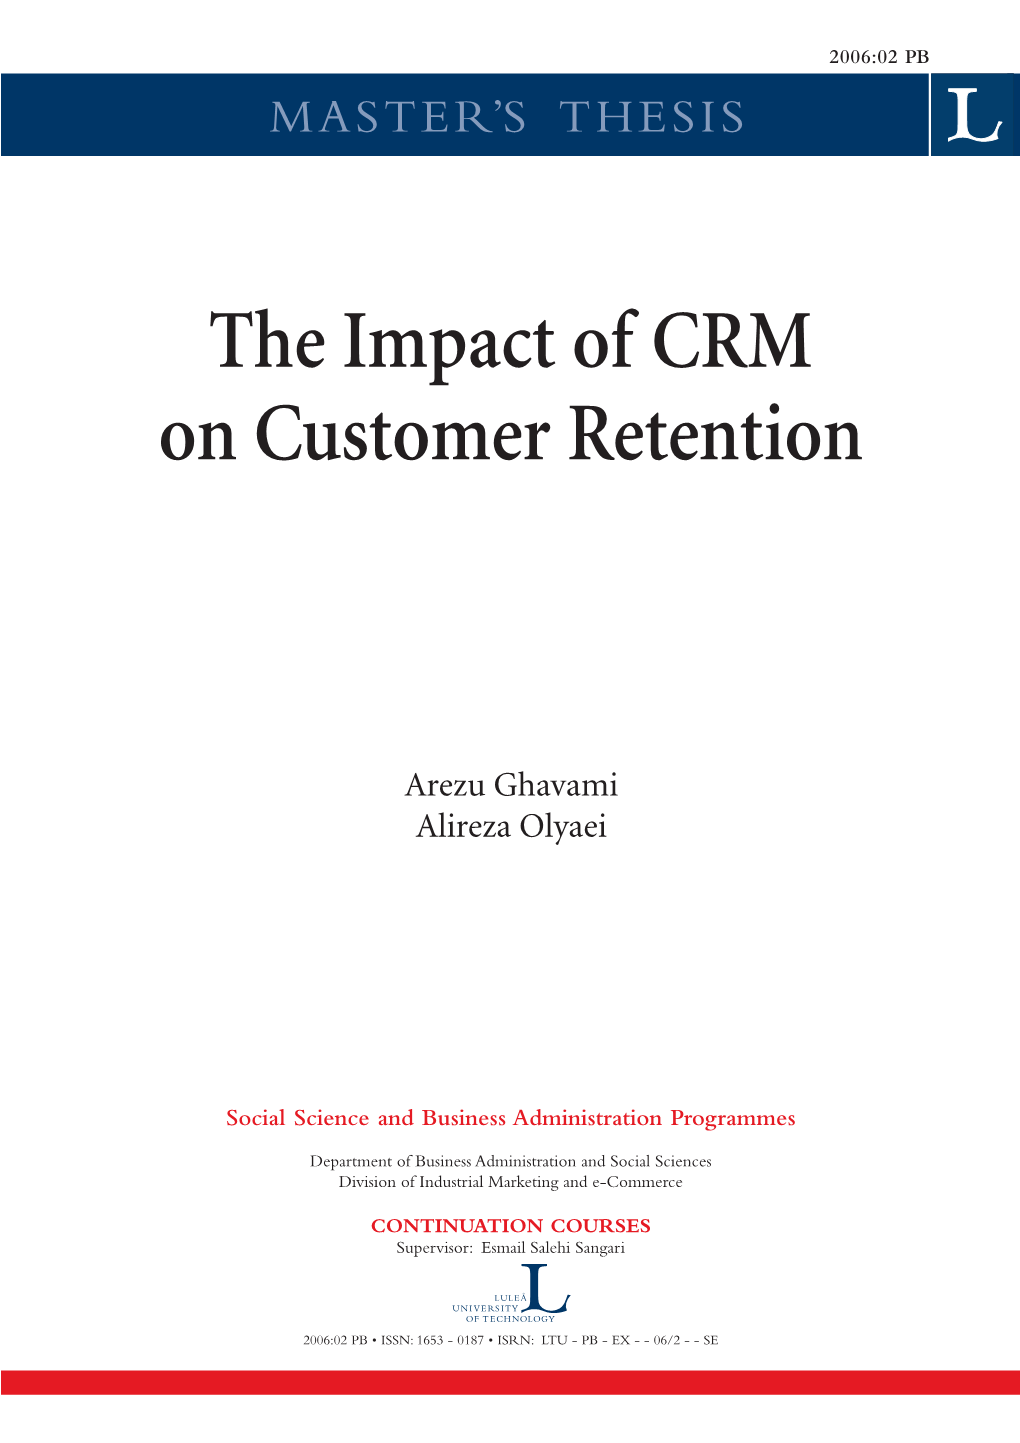 The Impact of CRM on Customer Retention